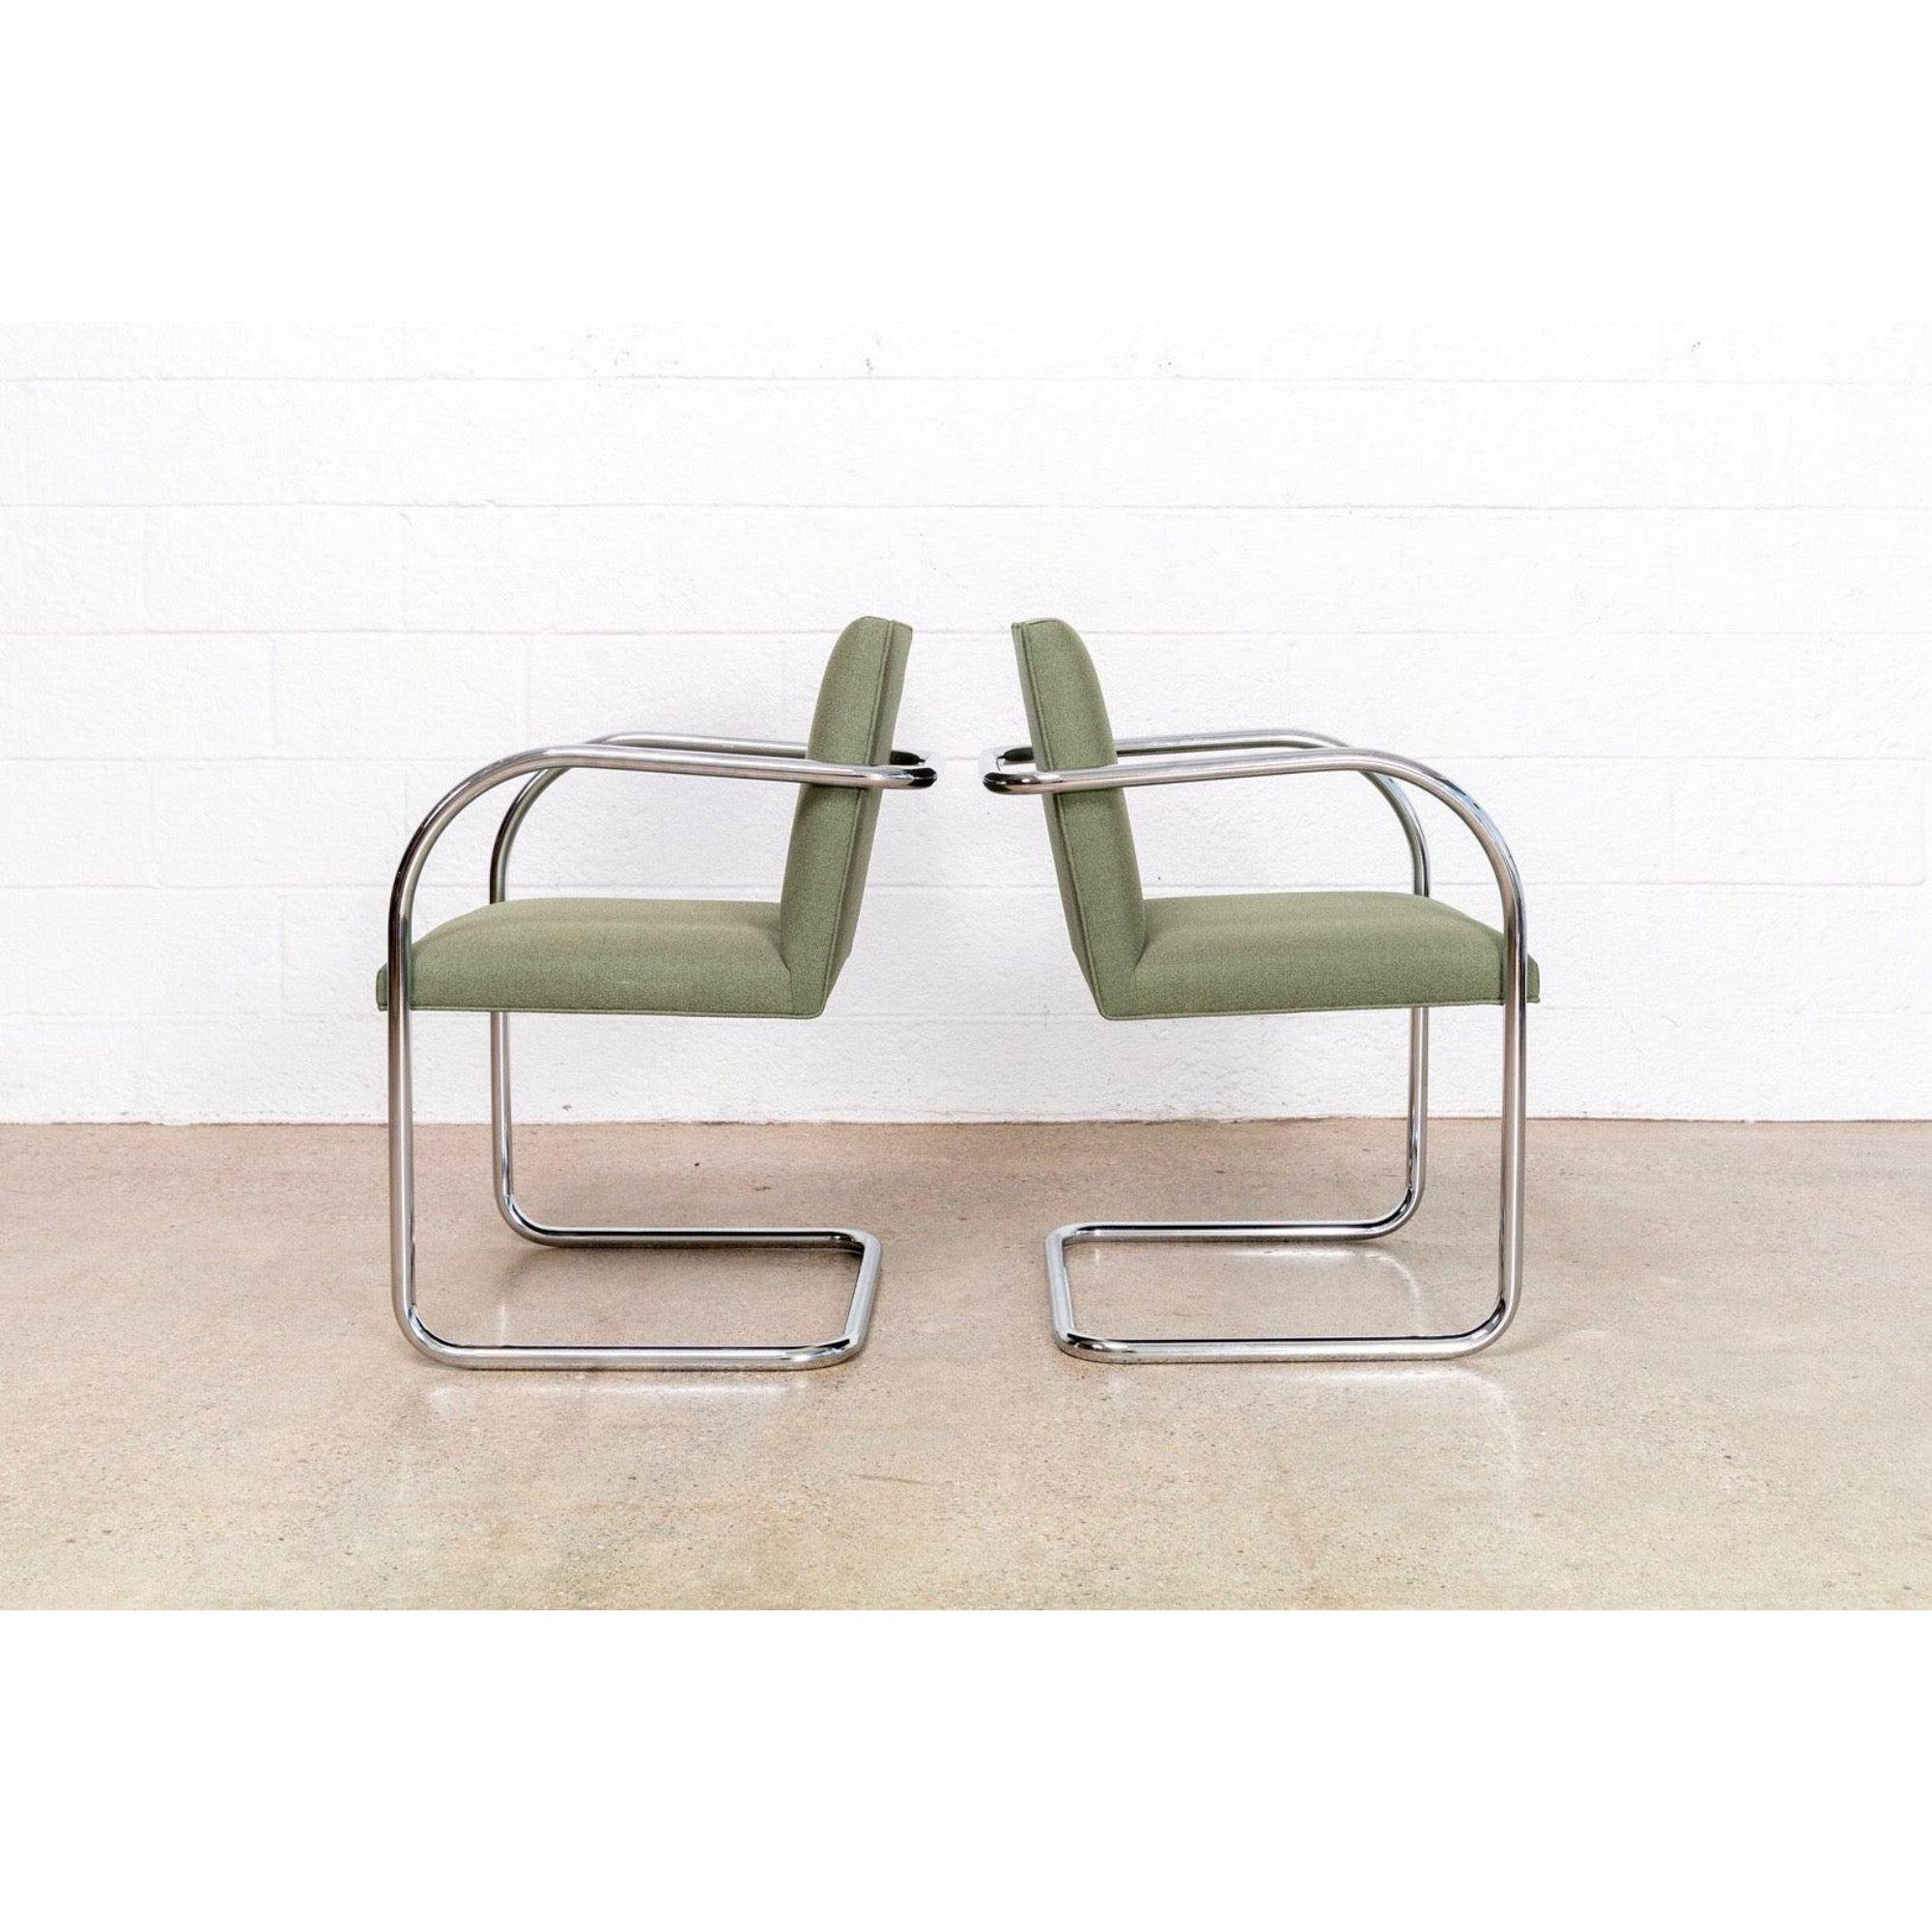 Steel Bauhaus Green Brno Tubular Cantilever Dining Chairs by Mies Van Der Rohe